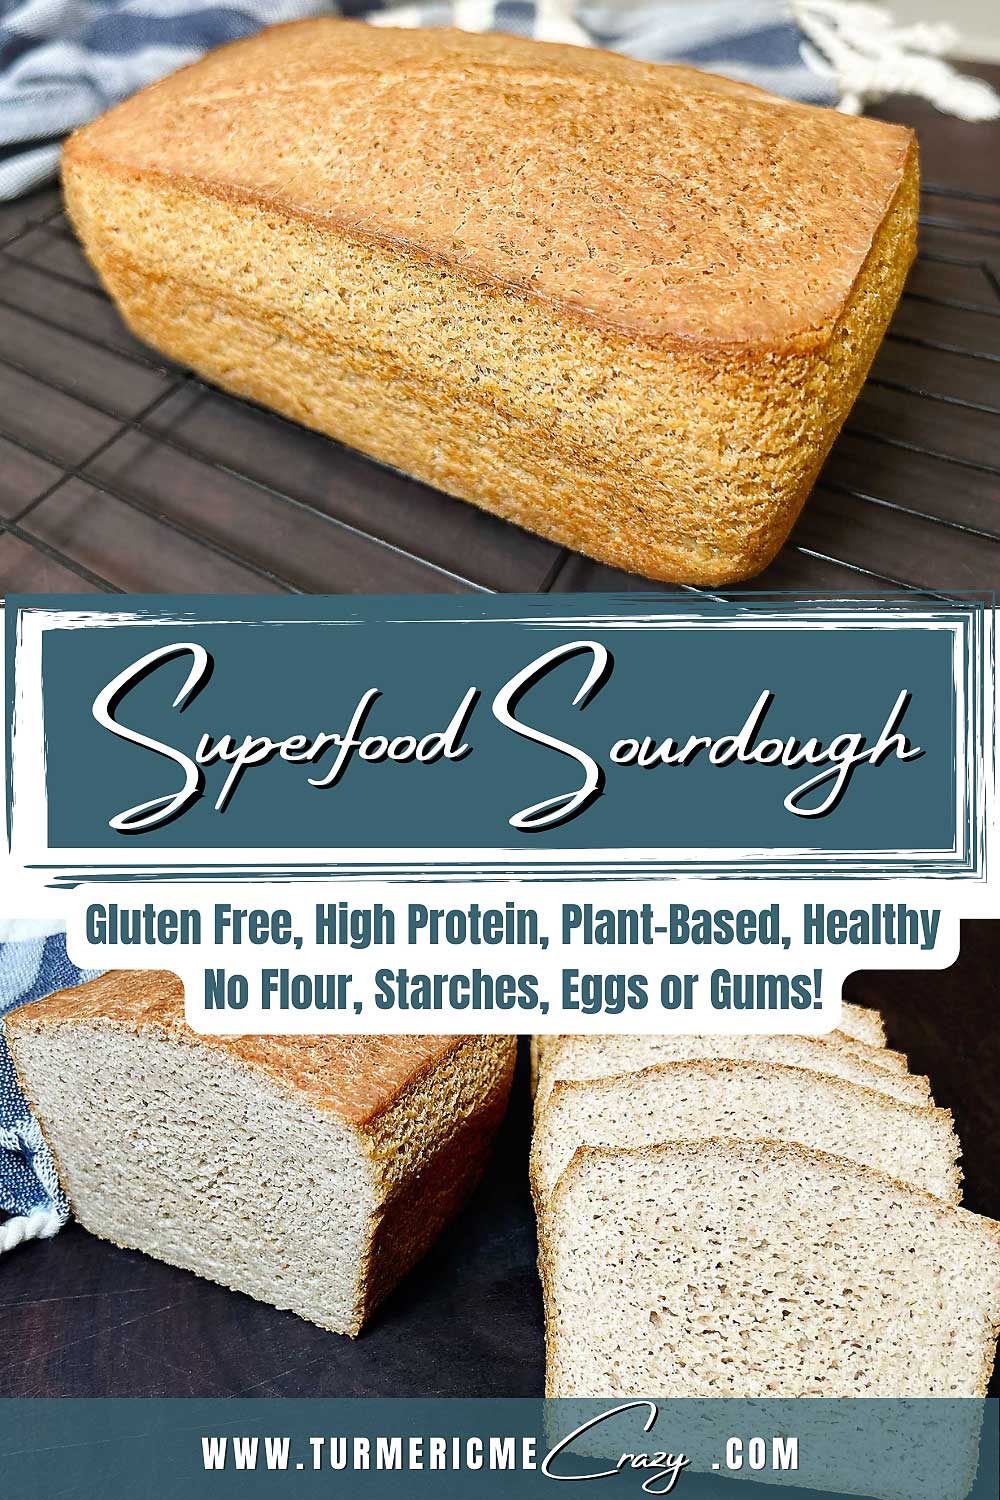 Elevate your baking game with our Superfood Gluten-Free Blender Bread recipe! 🍞 This easy-to-follow recipe not only caters to gluten-sensitive individuals but also introduces a powerhouse of superfoods for a bread that's as nutritious as it is delicious. Perfect for a quick breakfast, a wholesome snack, or a guilt-free treat, this blender bread will quickly become a staple in your kitchen.#GlutenFreeBread #SuperfoodRecipe #HealthyBaking #BlenderBread #NutrientPacked #GlutenFreeLiving #EasyRecipes